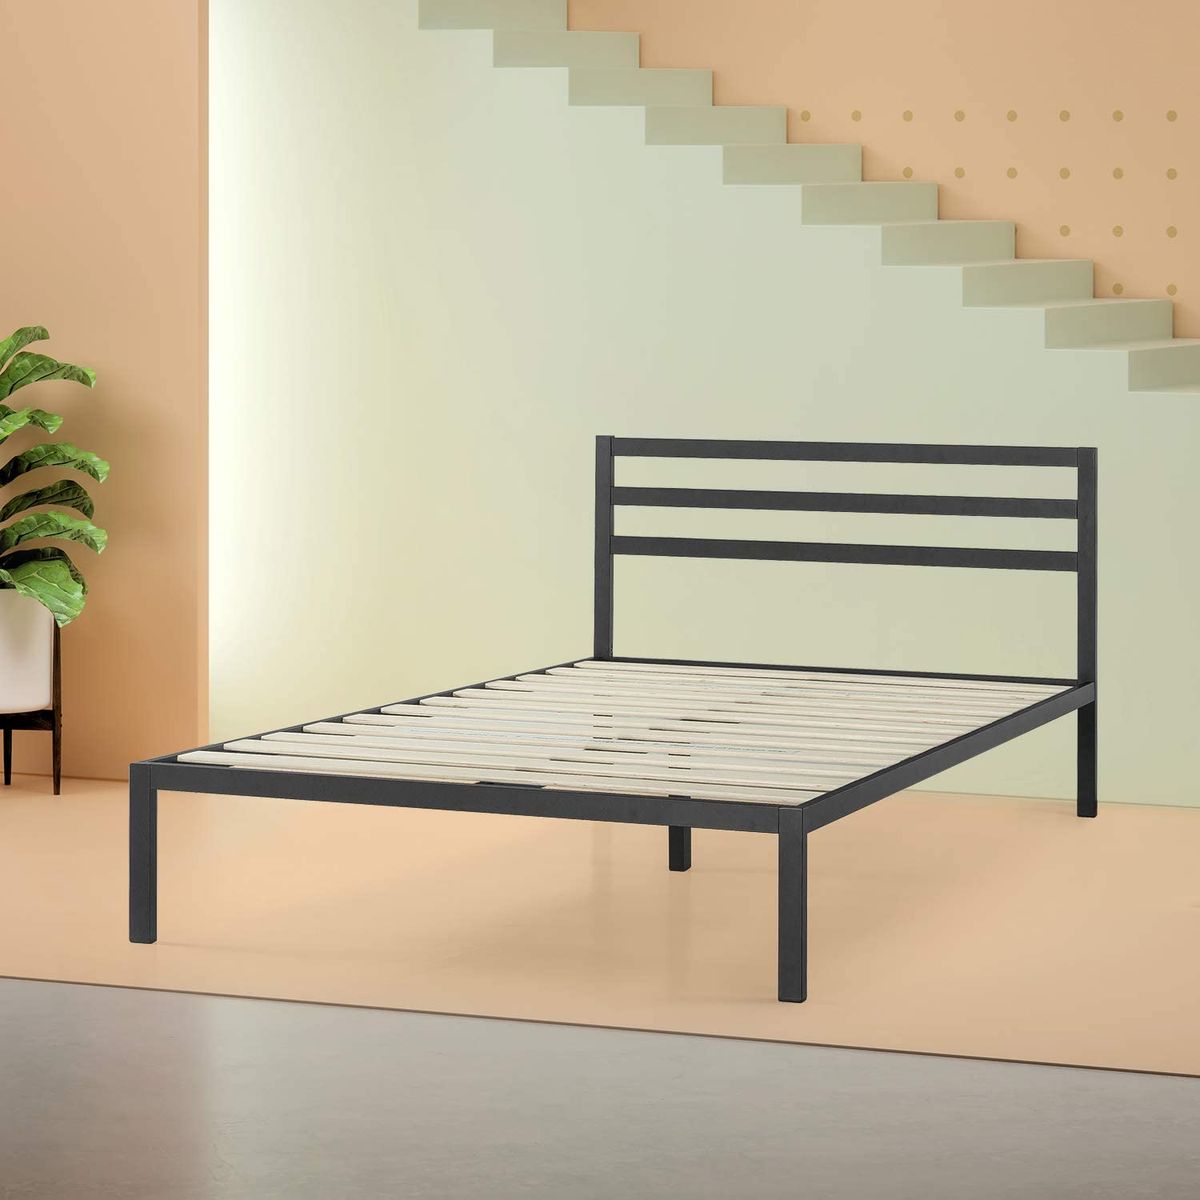 19 Best Metal Bed Frames 2020 The, Stainless Steel Bed Frame Designs